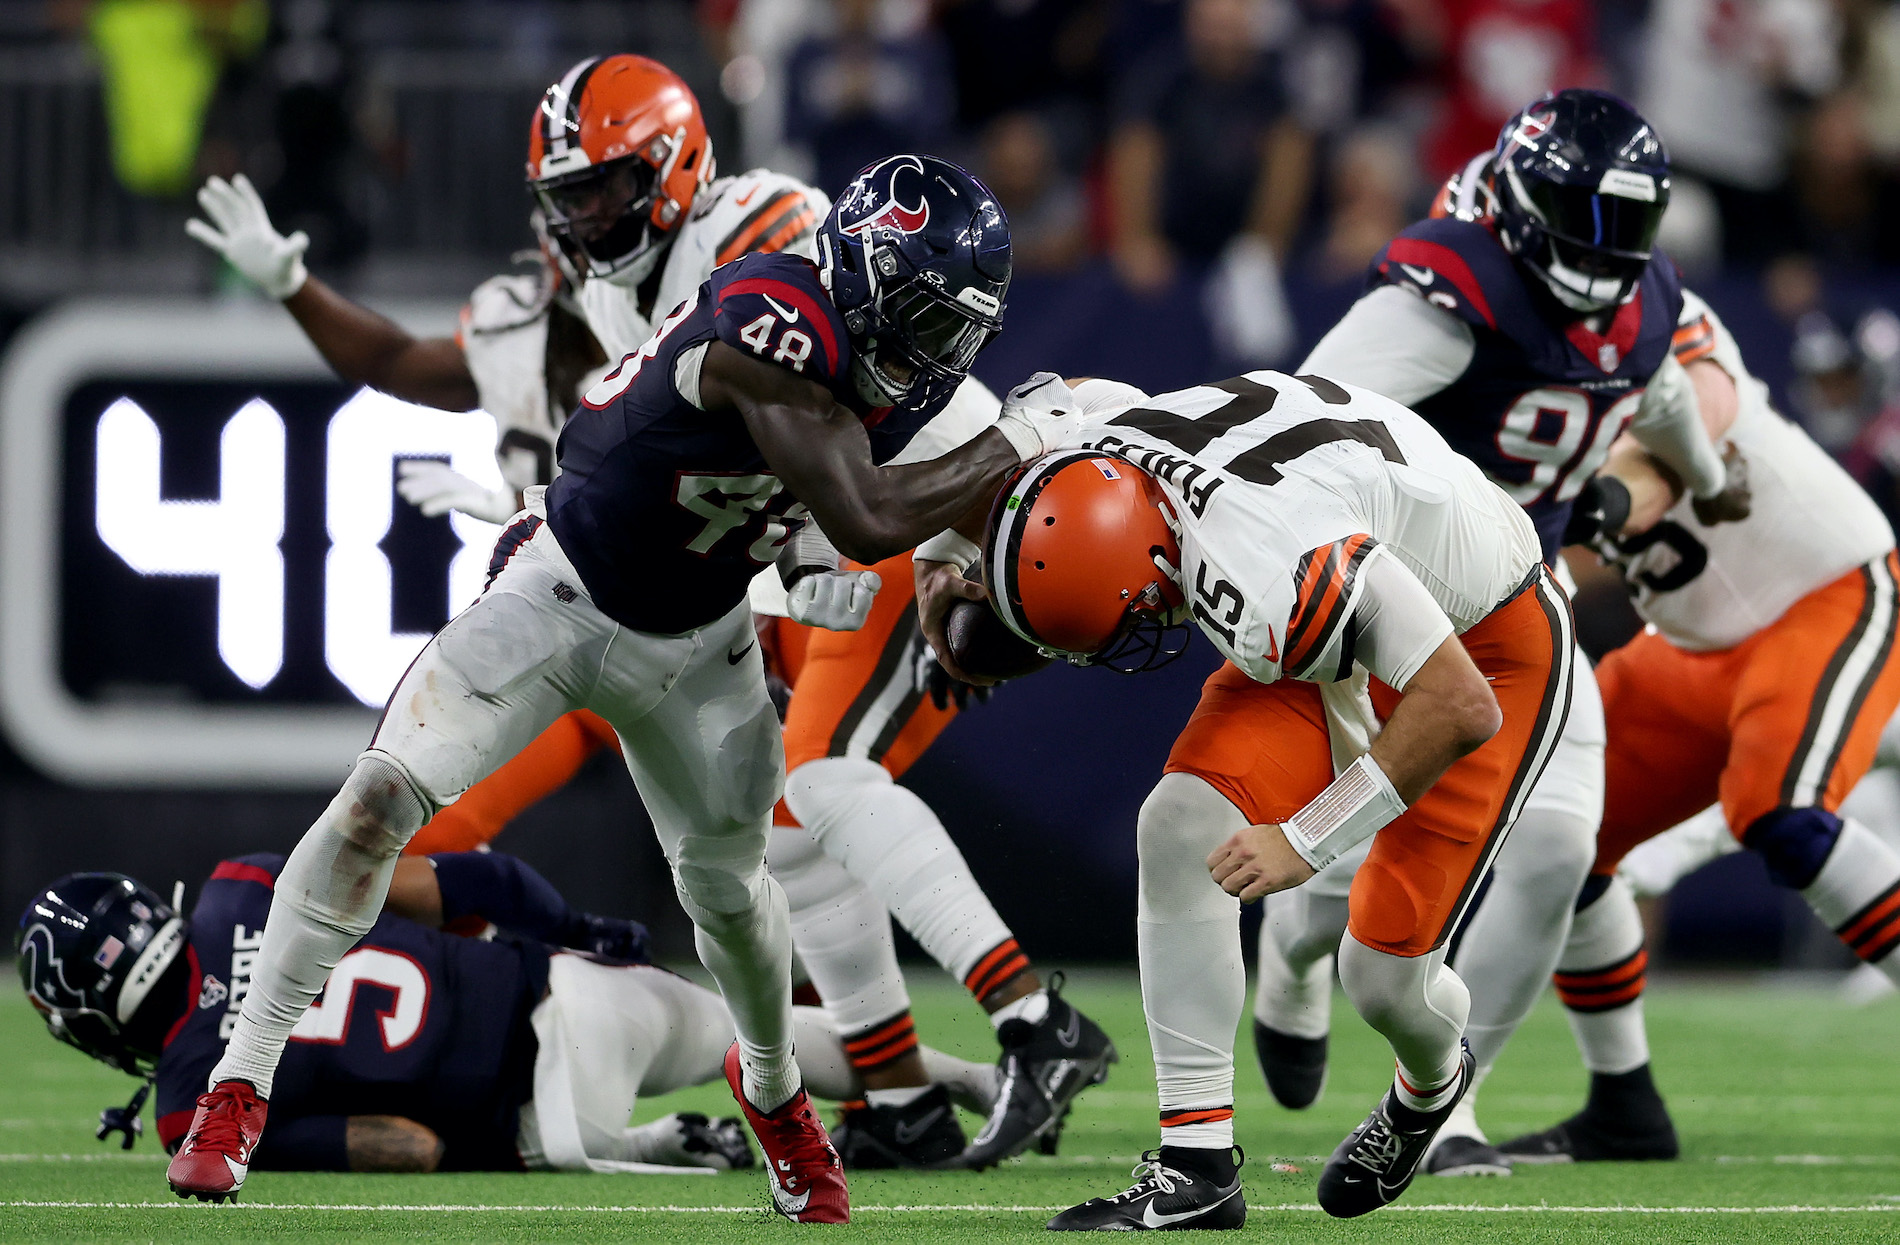 Christian Harris drags Joe Flacco to the ground in the Browns-Texans wild card game.